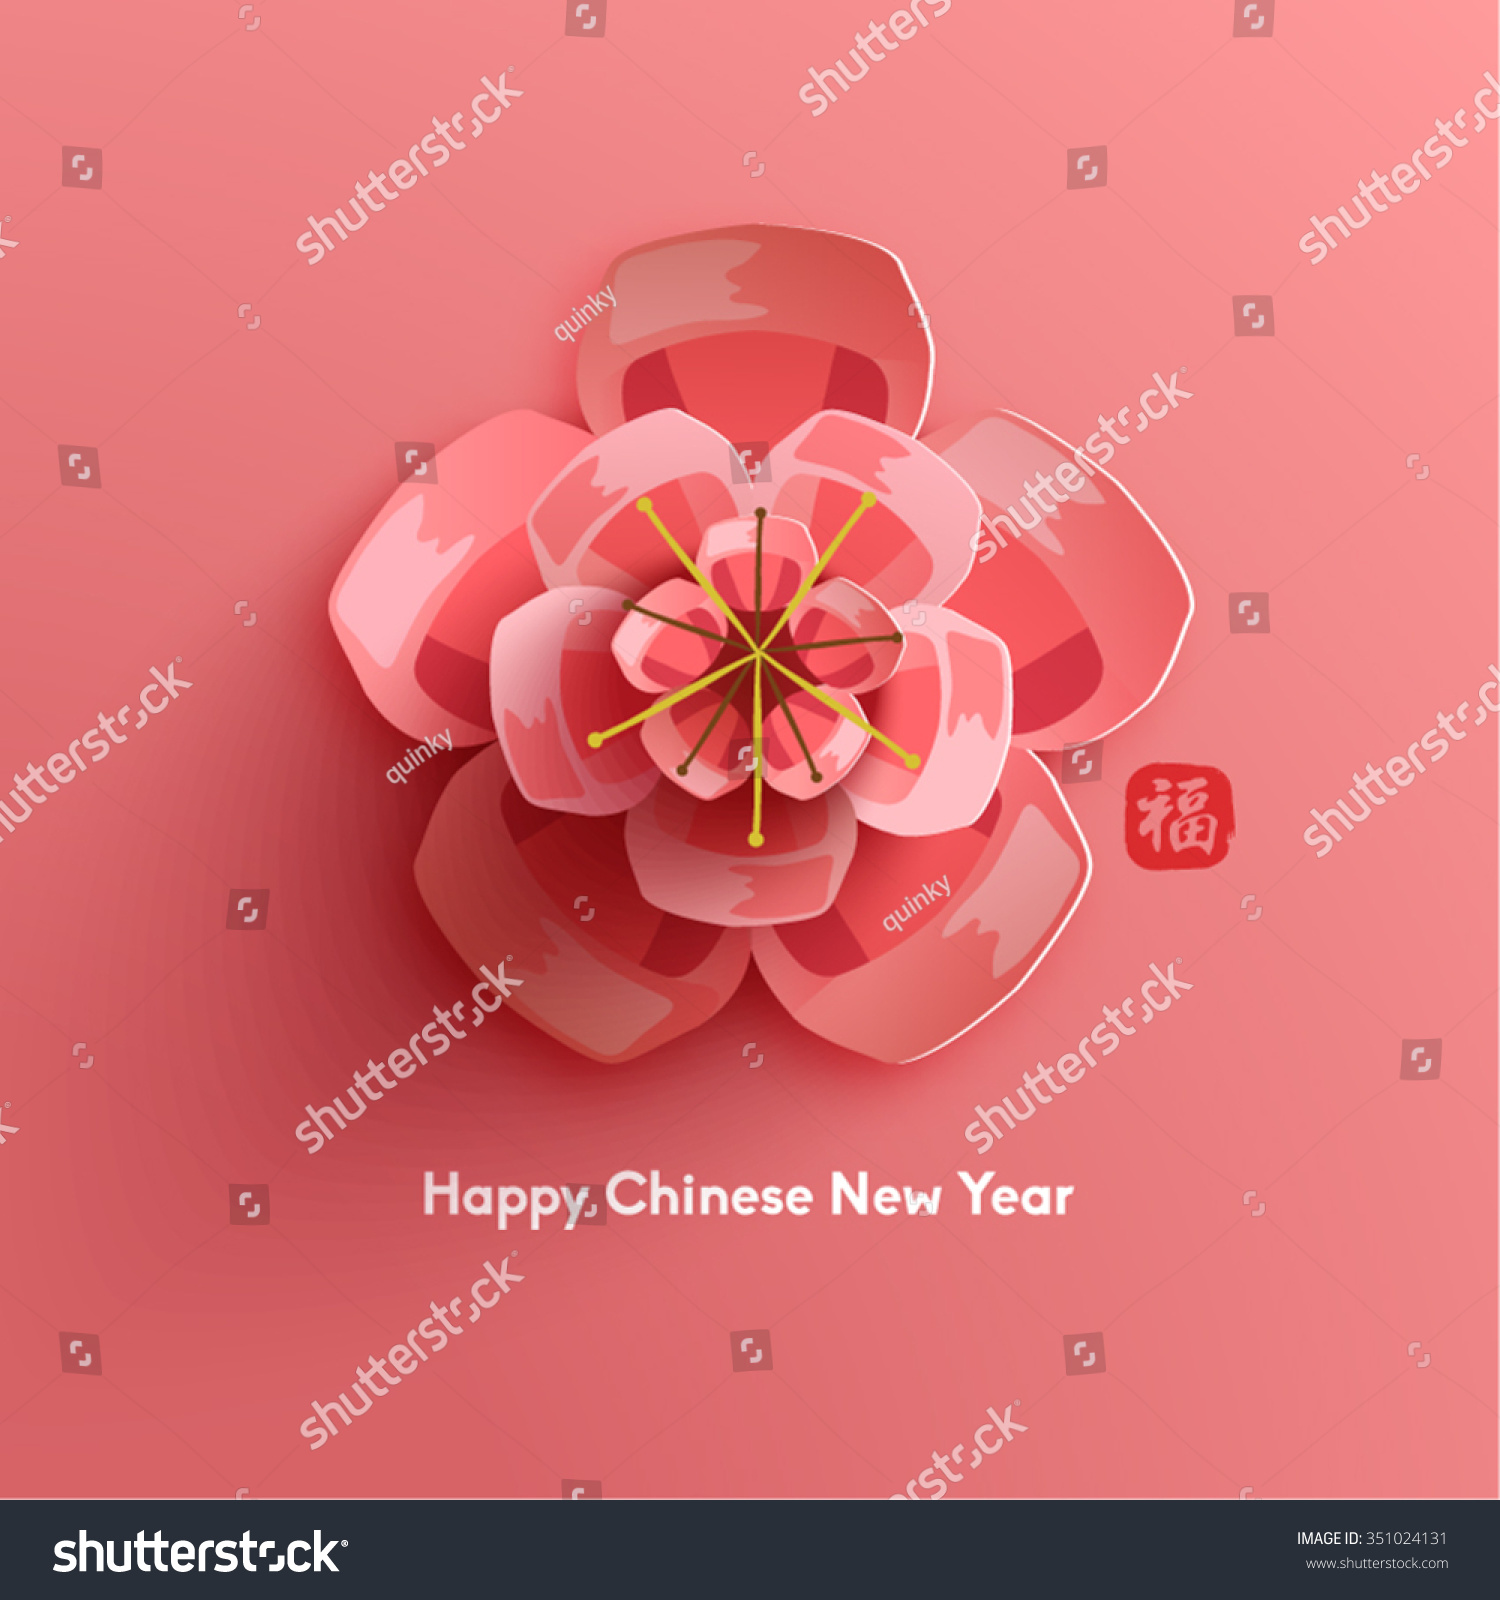 Chinese New Year Blooming Flower Vector Design (Chinese Translation: Prosperity) #351024131